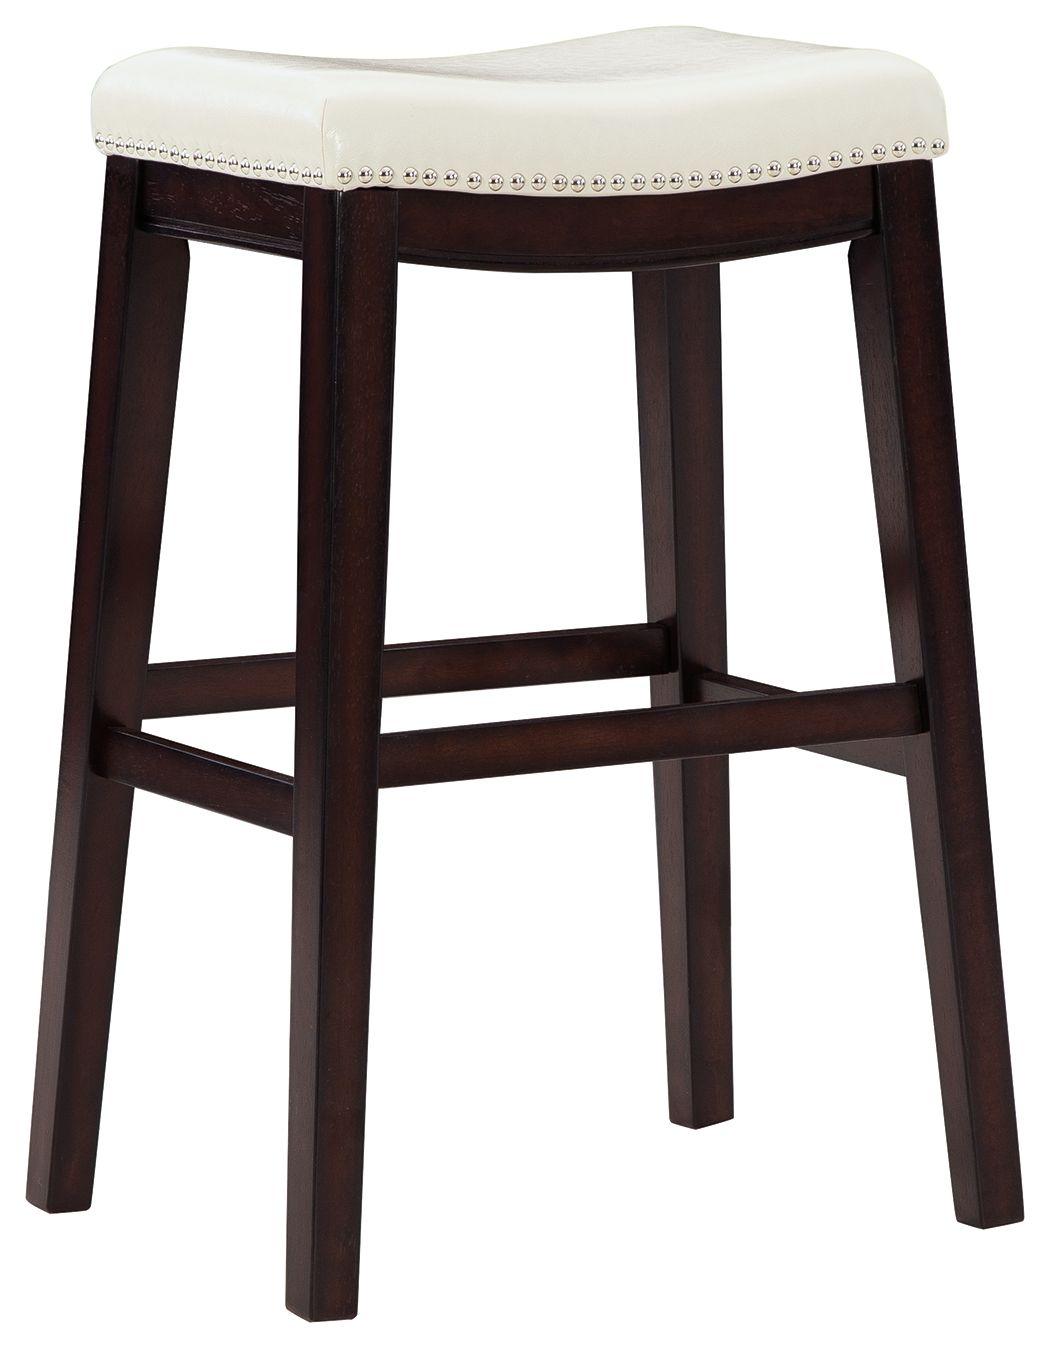 Signature Design by Ashley® - Lemante - Tall Upholstered Stool (Set of 2) - 5th Avenue Furniture